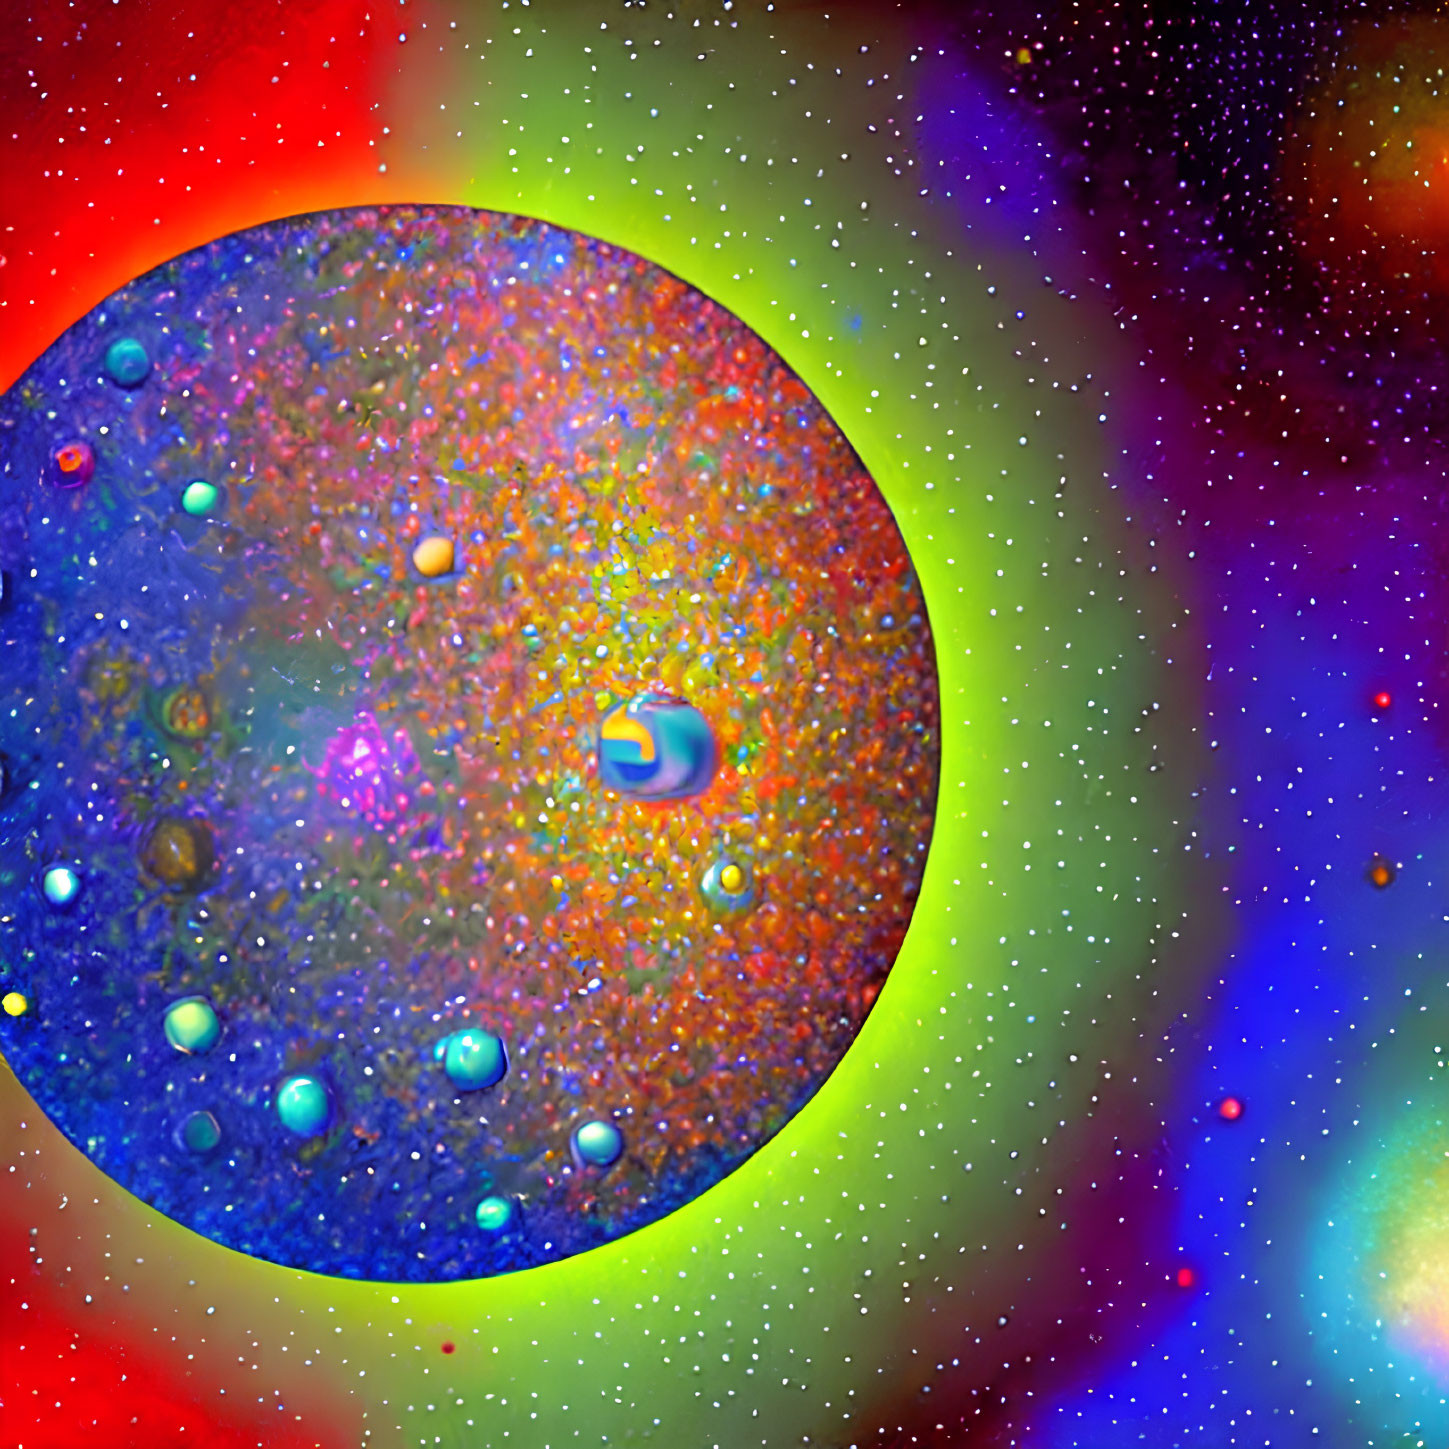 Colorful Abstract Cosmic Scene with Large Sphere and Starry Background